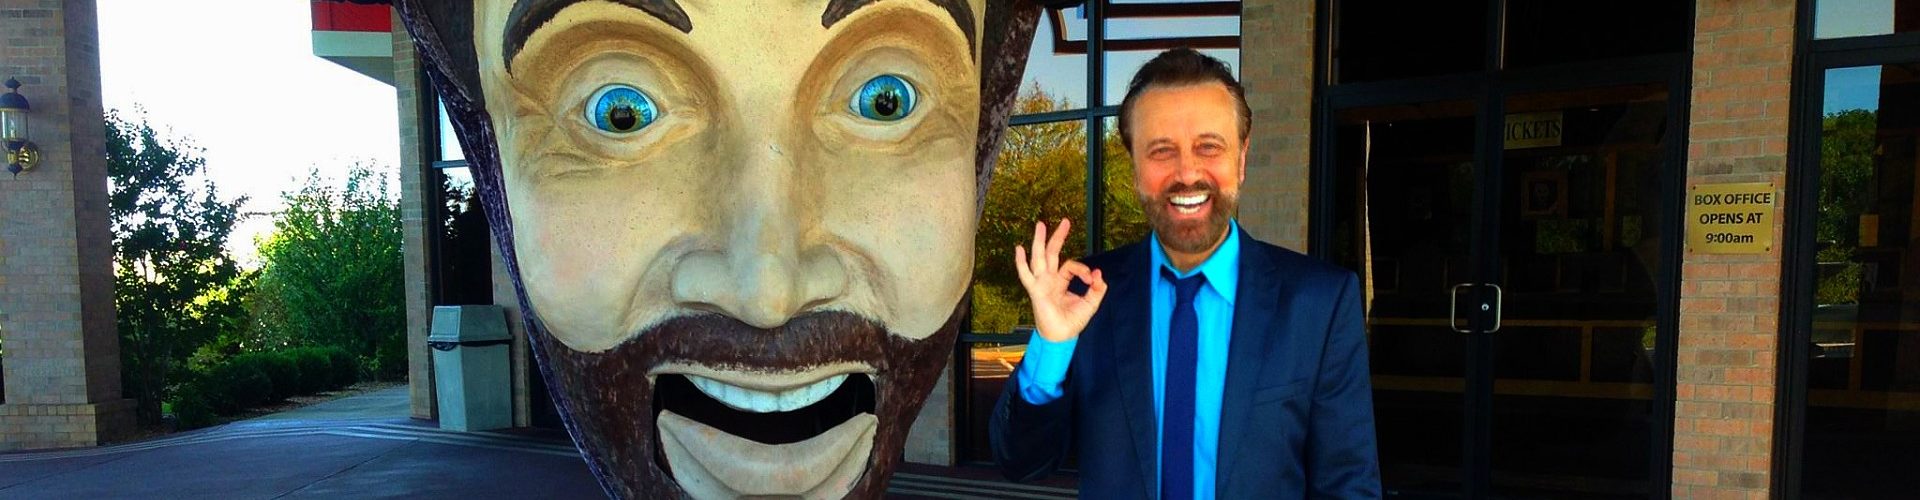 Yakov Smirnoff returns to Branson, MO for a series of shows in October and November 2018.